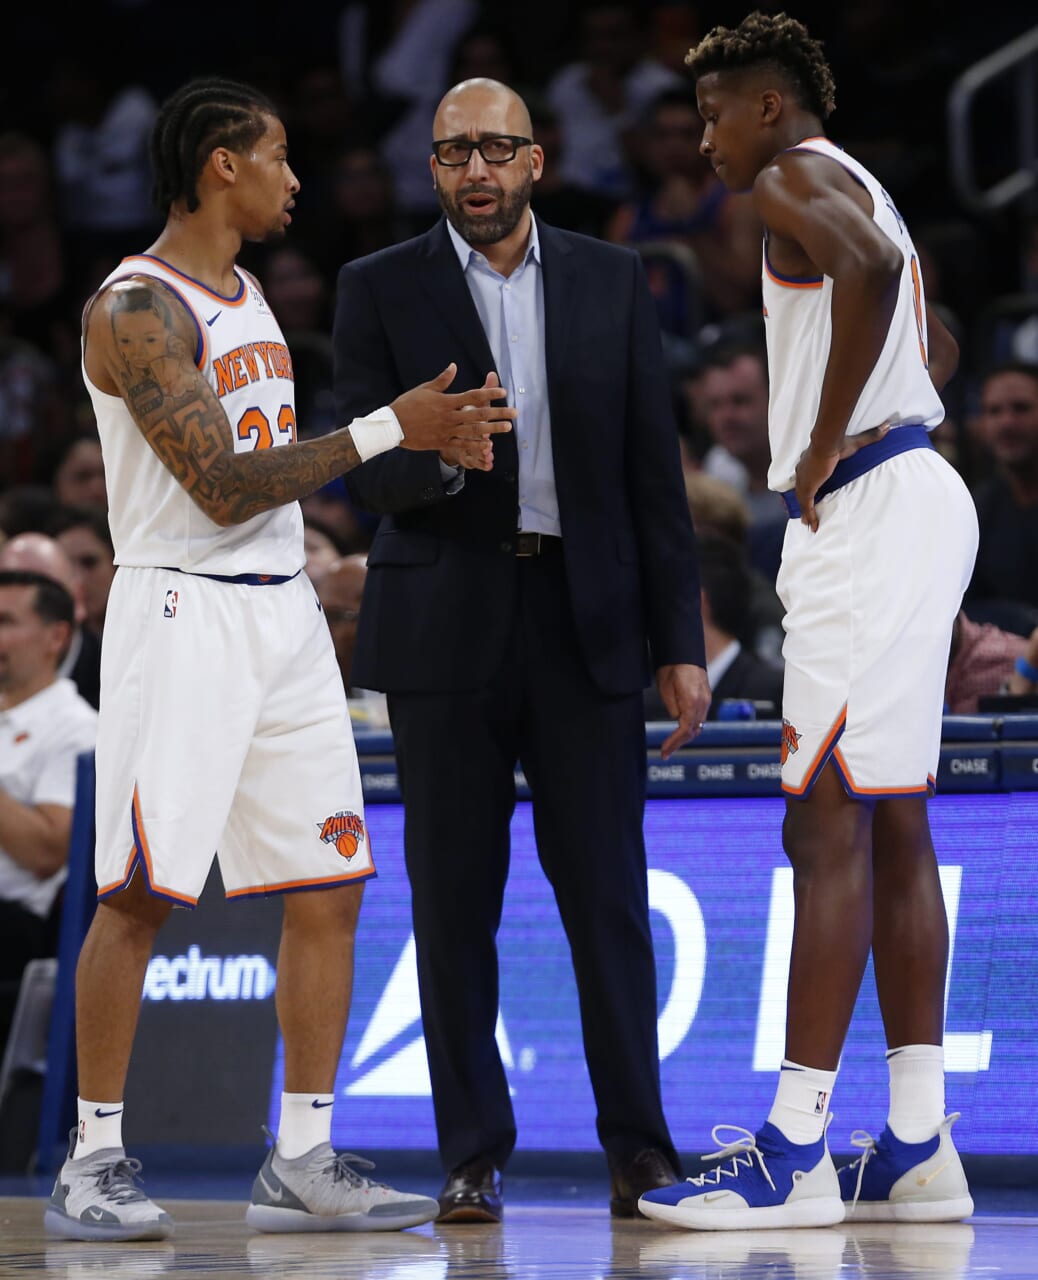 New York Knicks: Overall Effort Level Shows That Fizdale Is a Beloved Coach